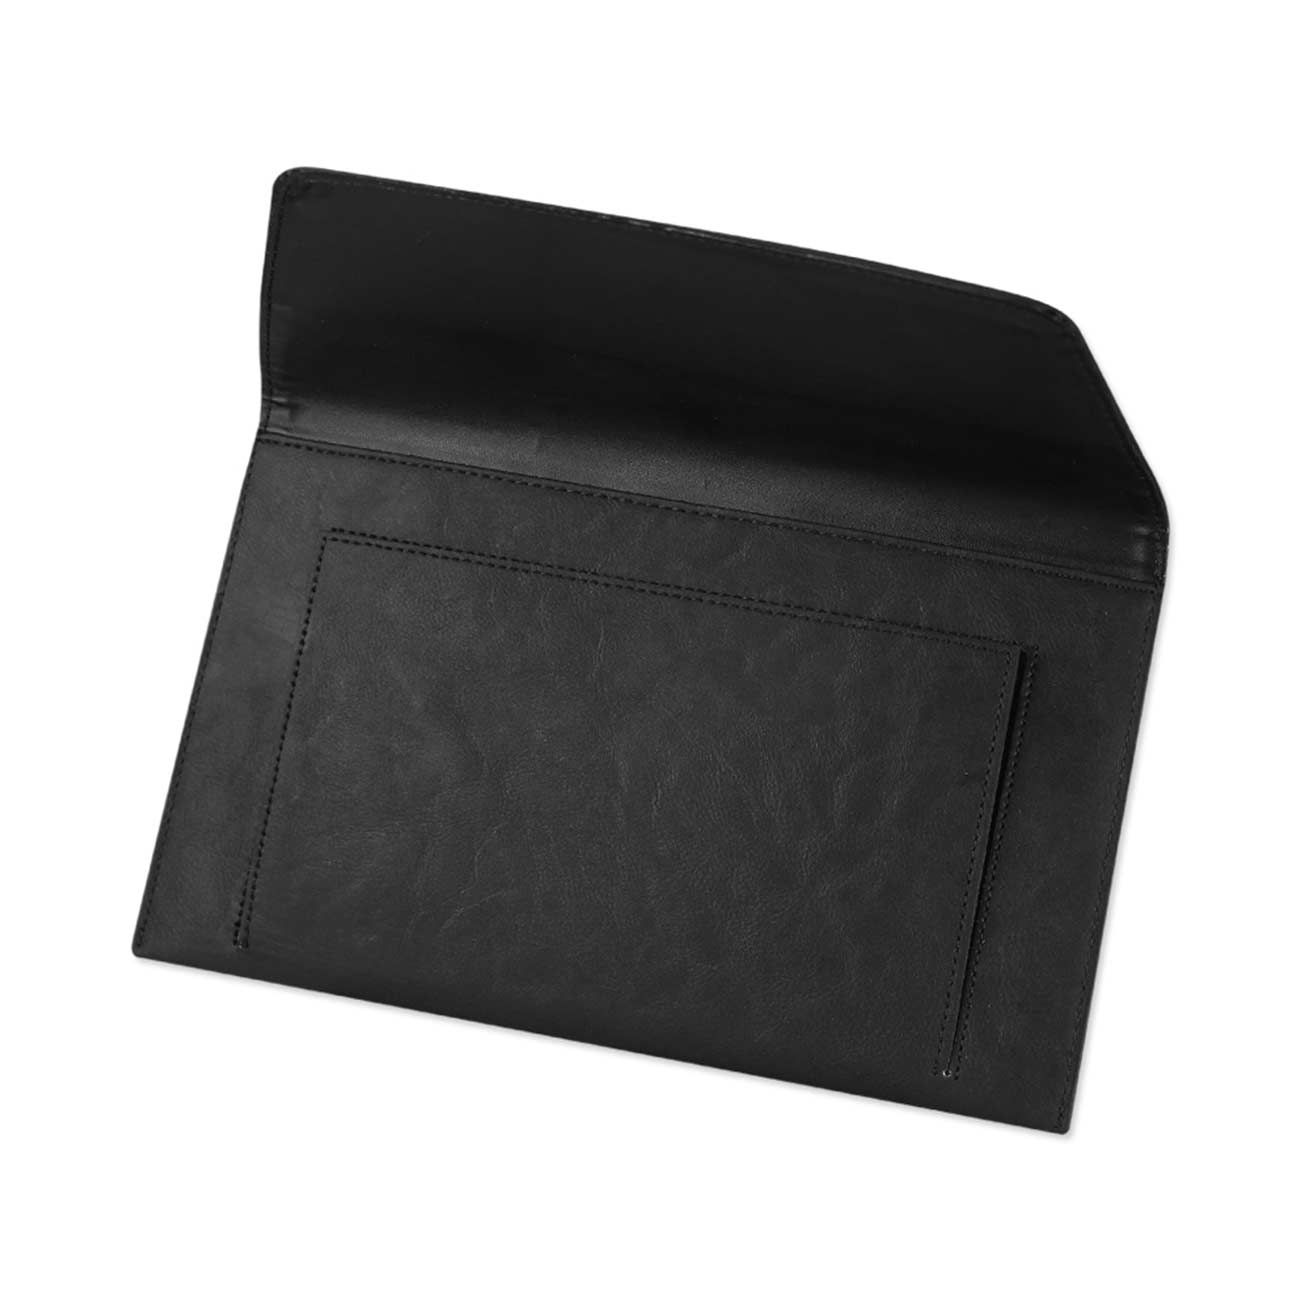 REIKO PREMIUM LEATHER CASE POUCH FOR 11.6INCHES IPADS AND TABLETS In BLACK